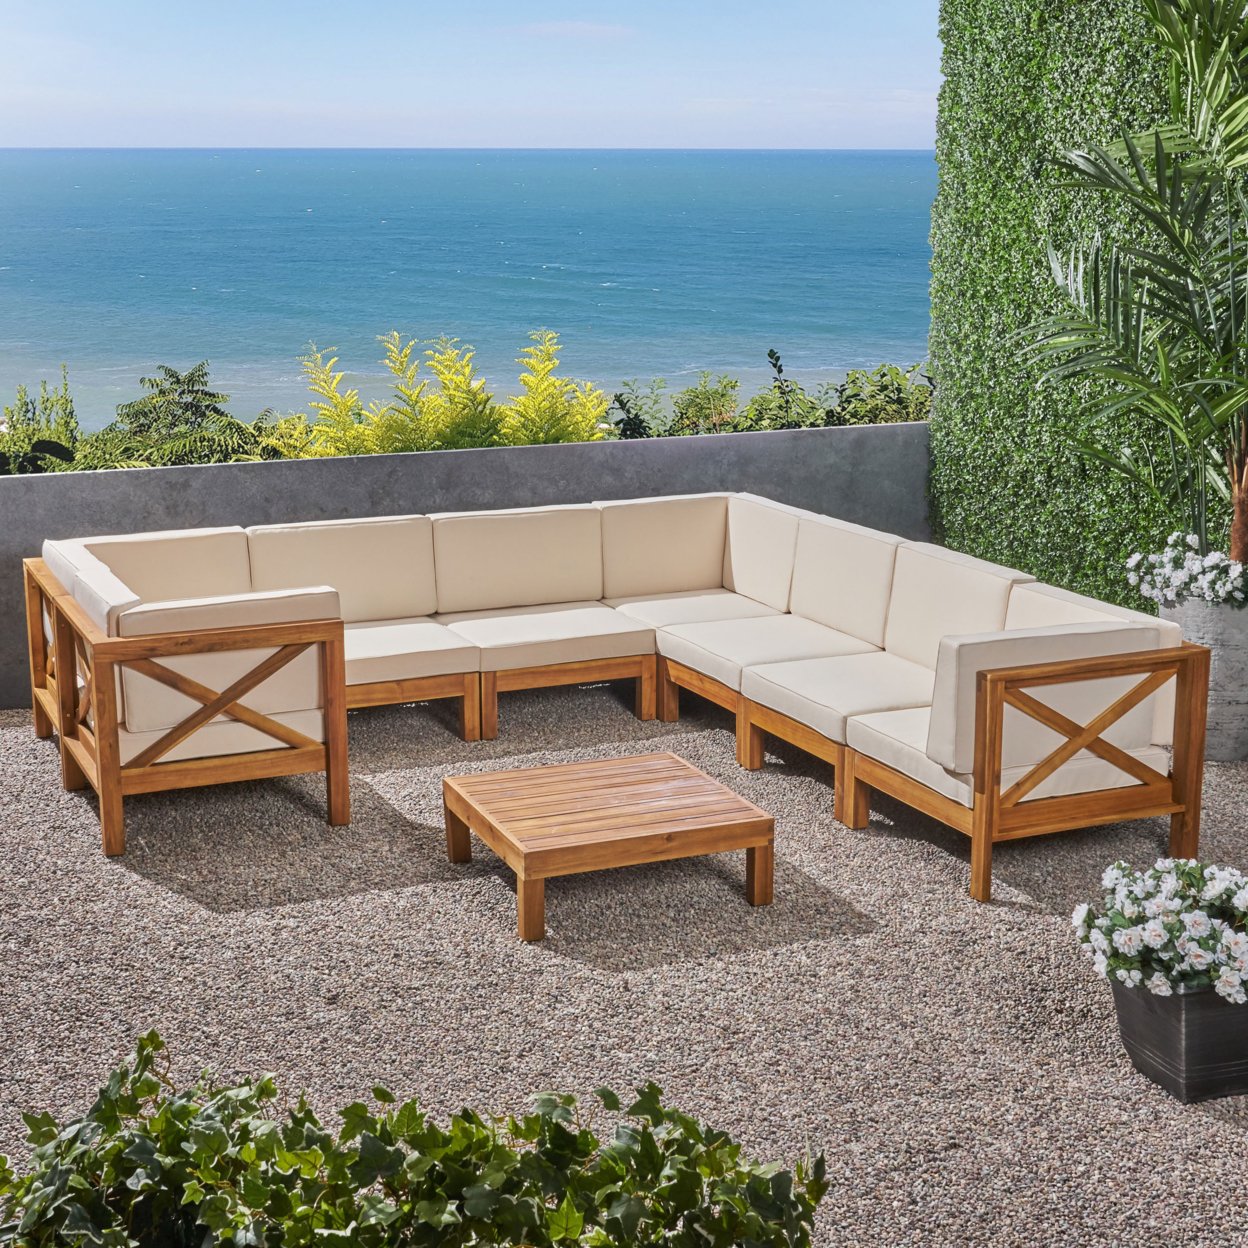 Brava Outdoor Acacia Wood 8 Seater U-Shaped Sectional Sofa Set With Coffee Table - Blue